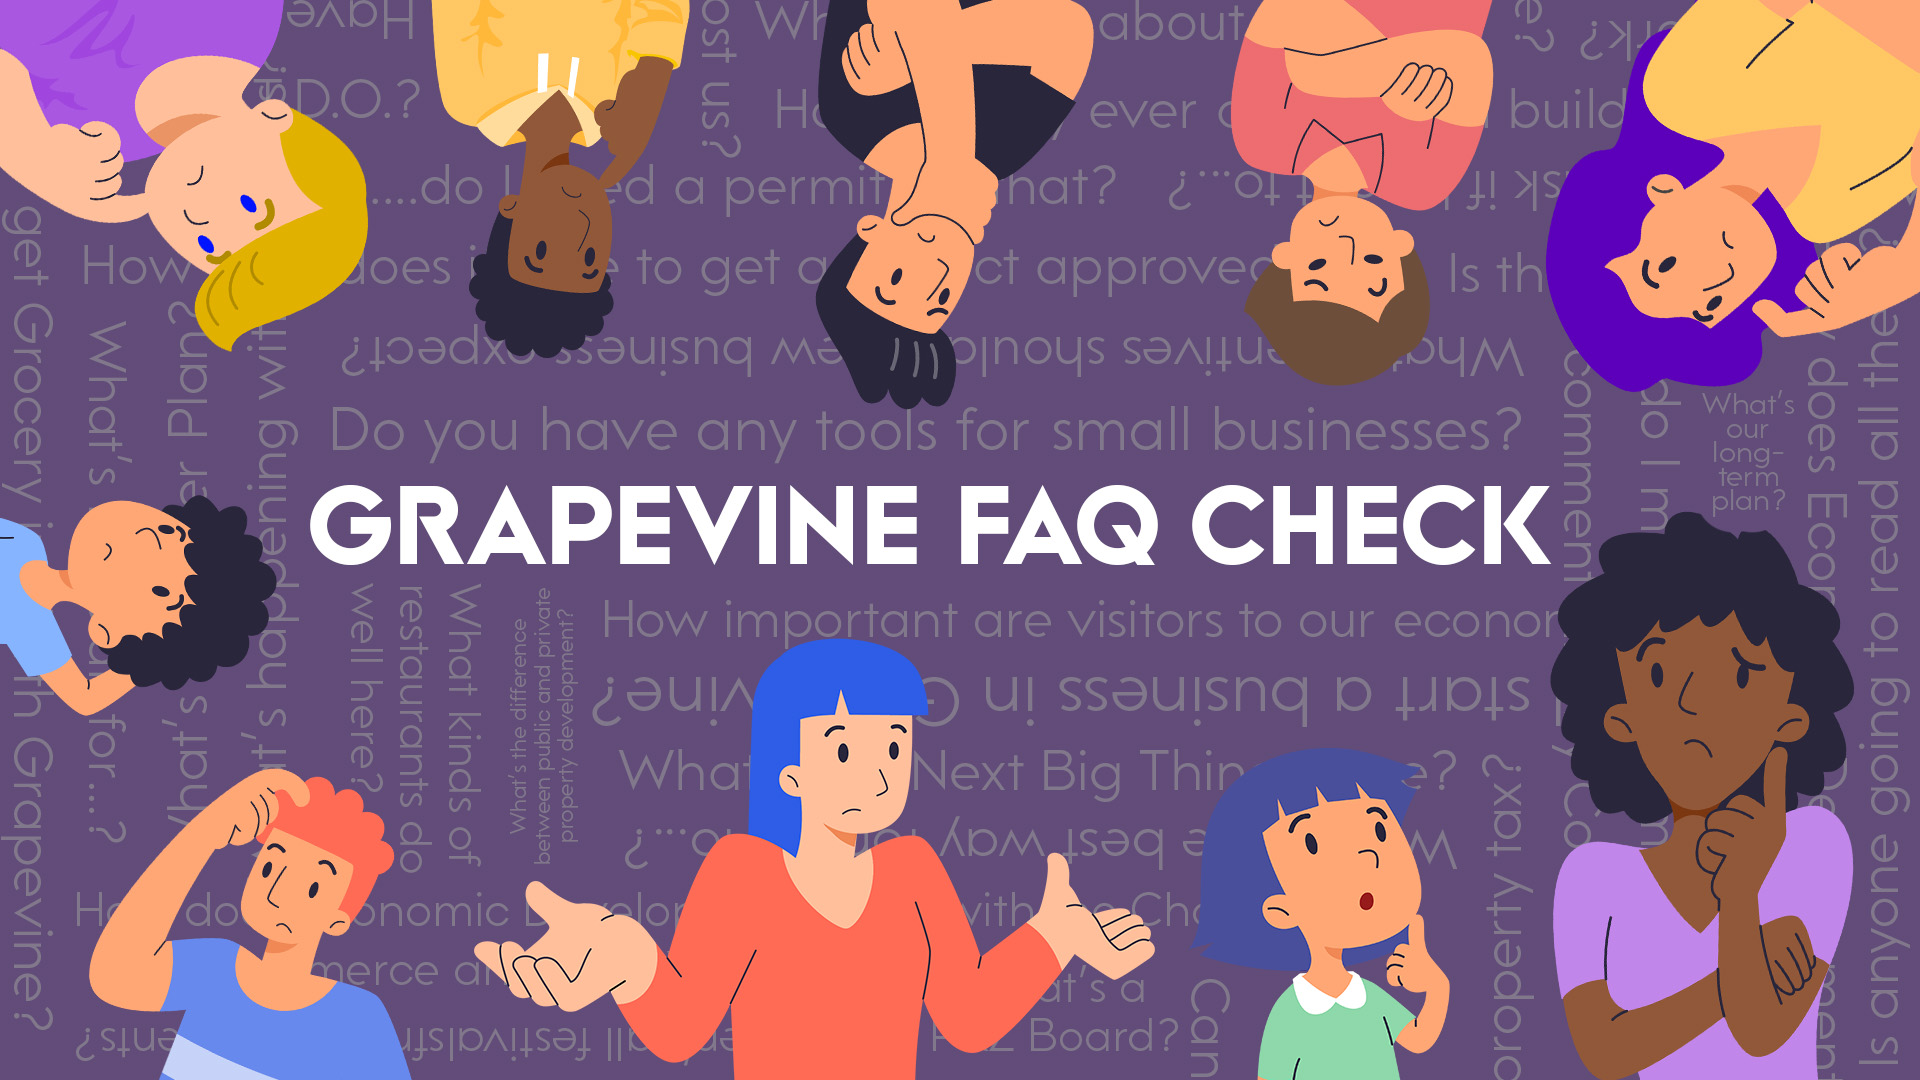 FAQ Check: What Do You Want to Know About Grapevine? Photo